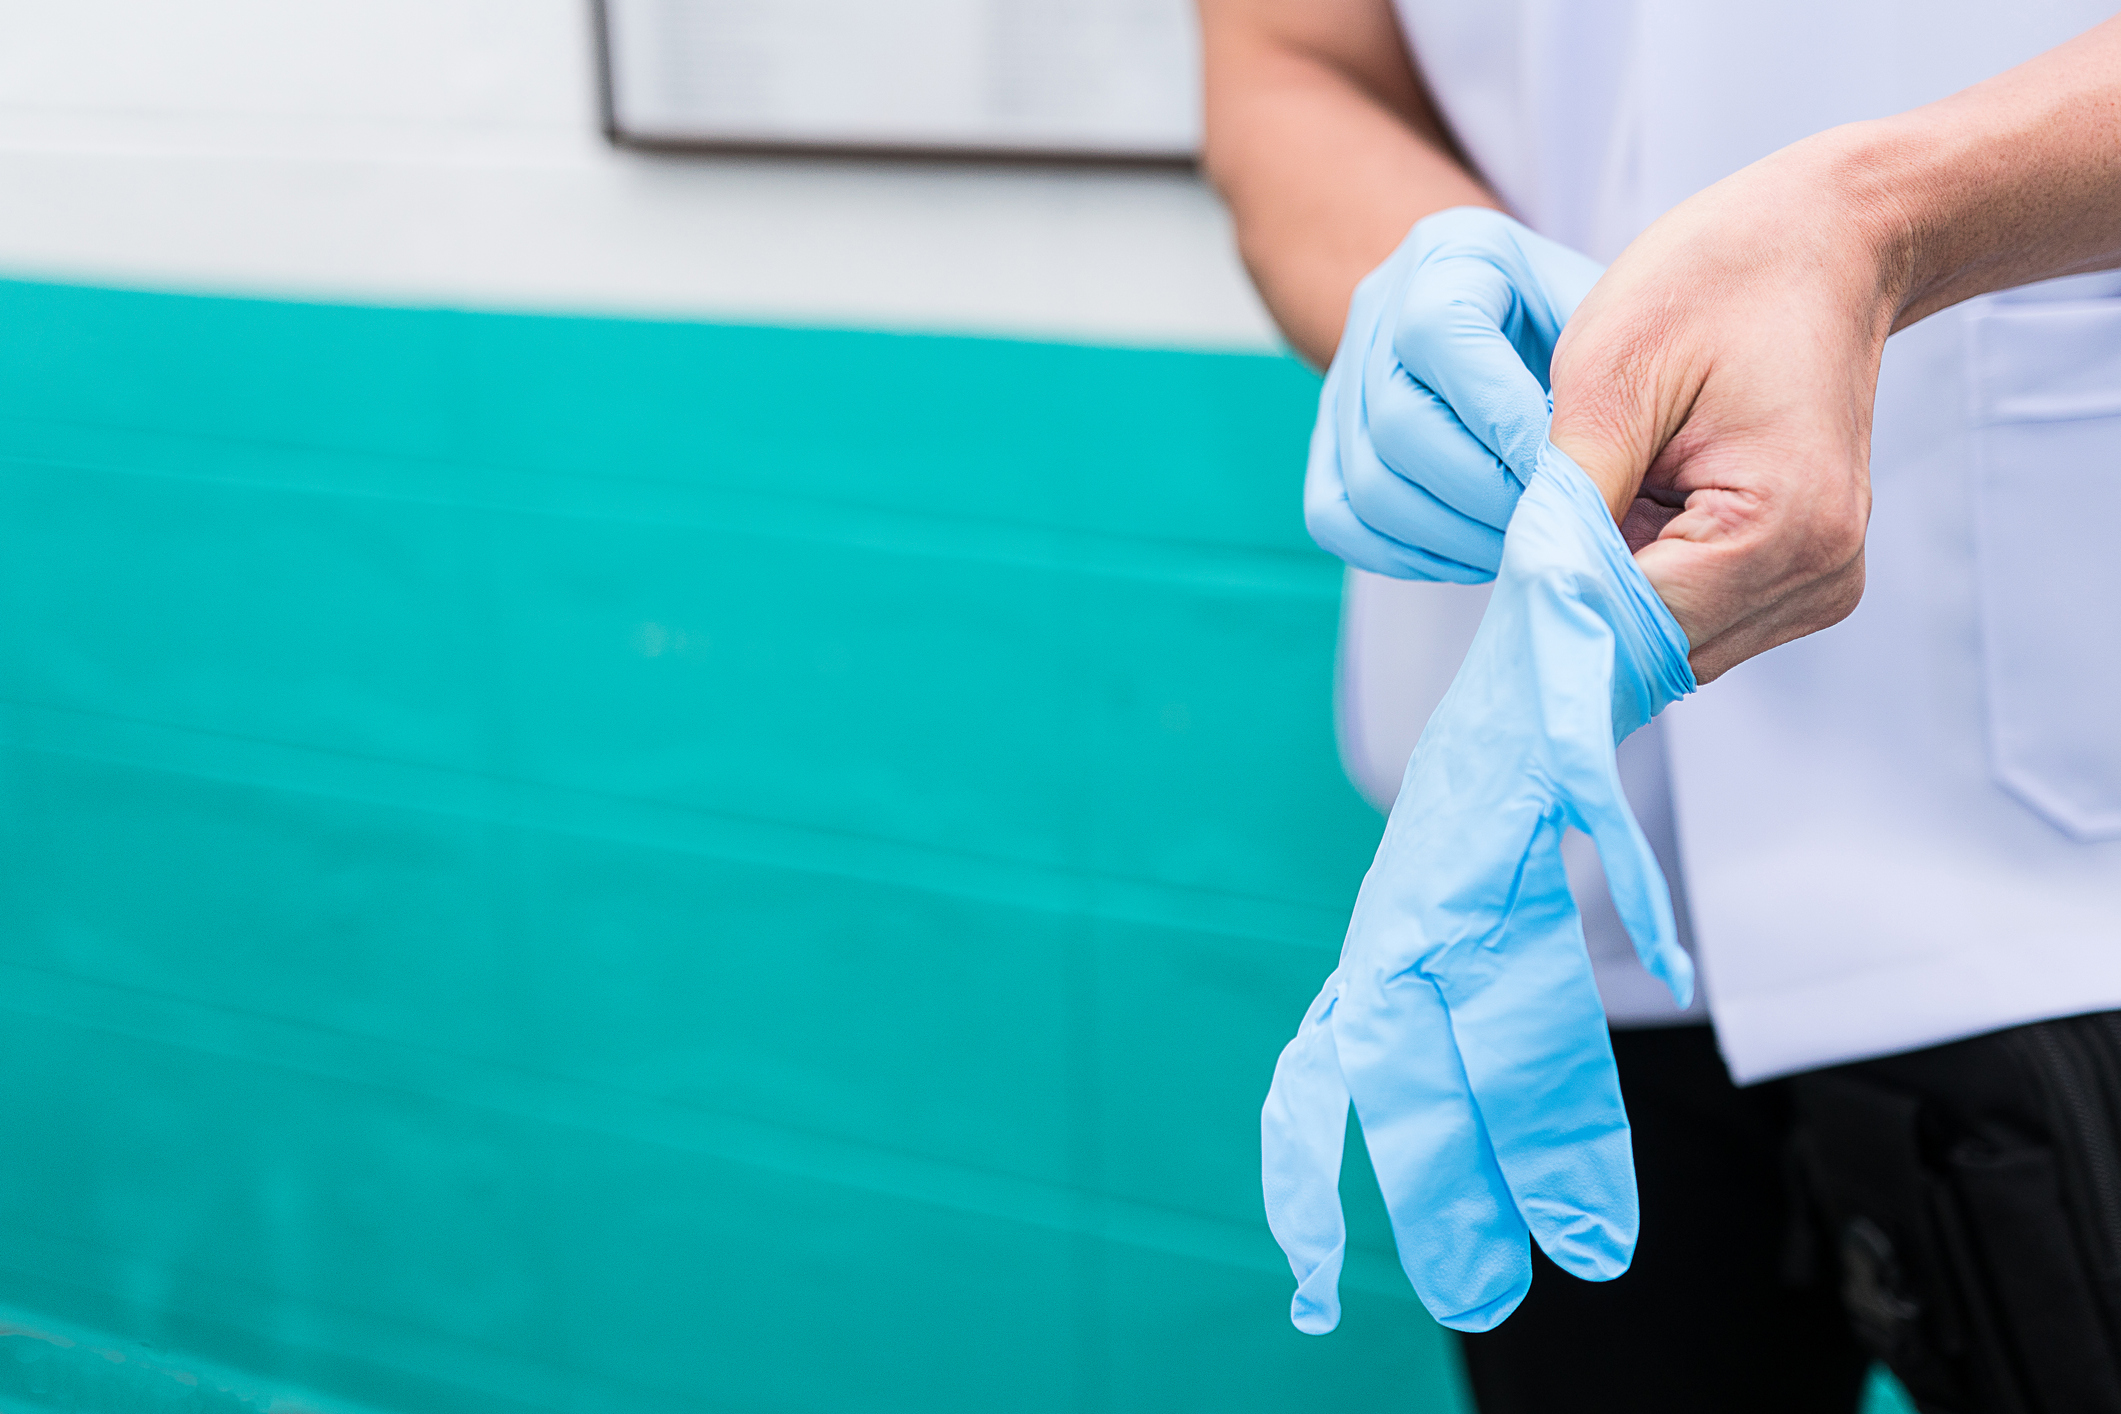 wearing sterile gloves to preparation for treatment